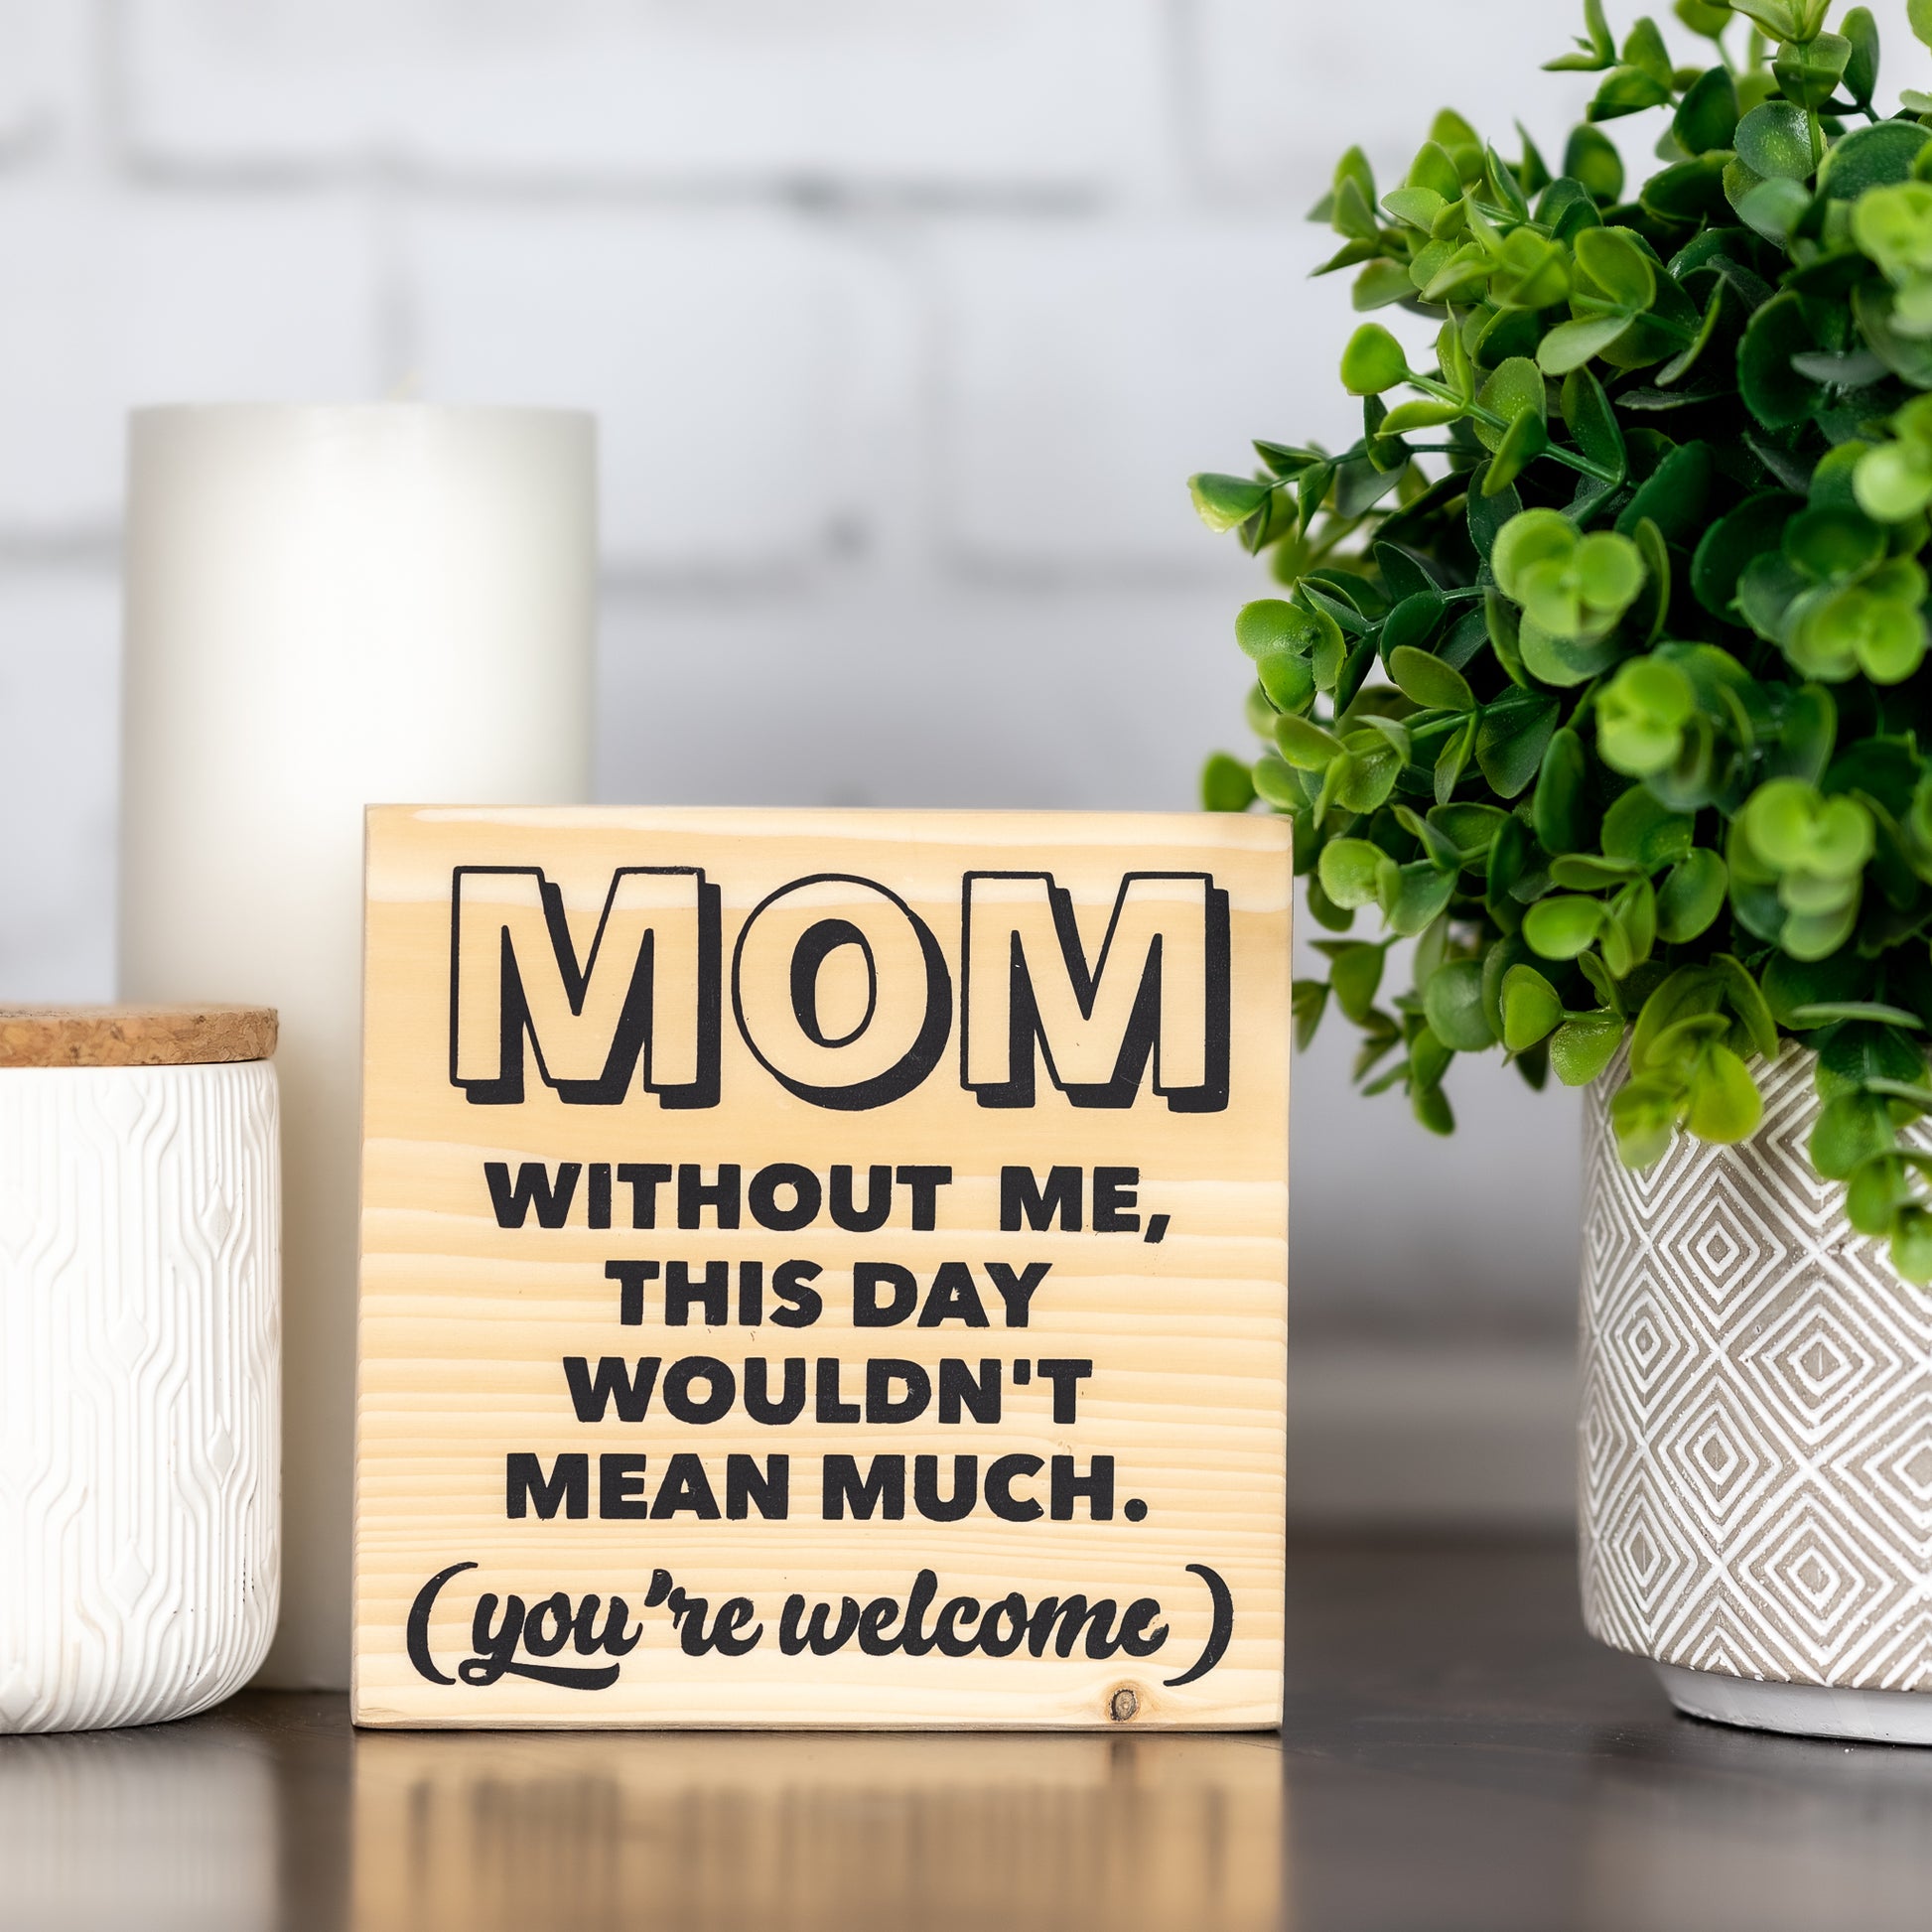 mom without me, this day wouldn't mean much. you're welcome ~ shelf block sign